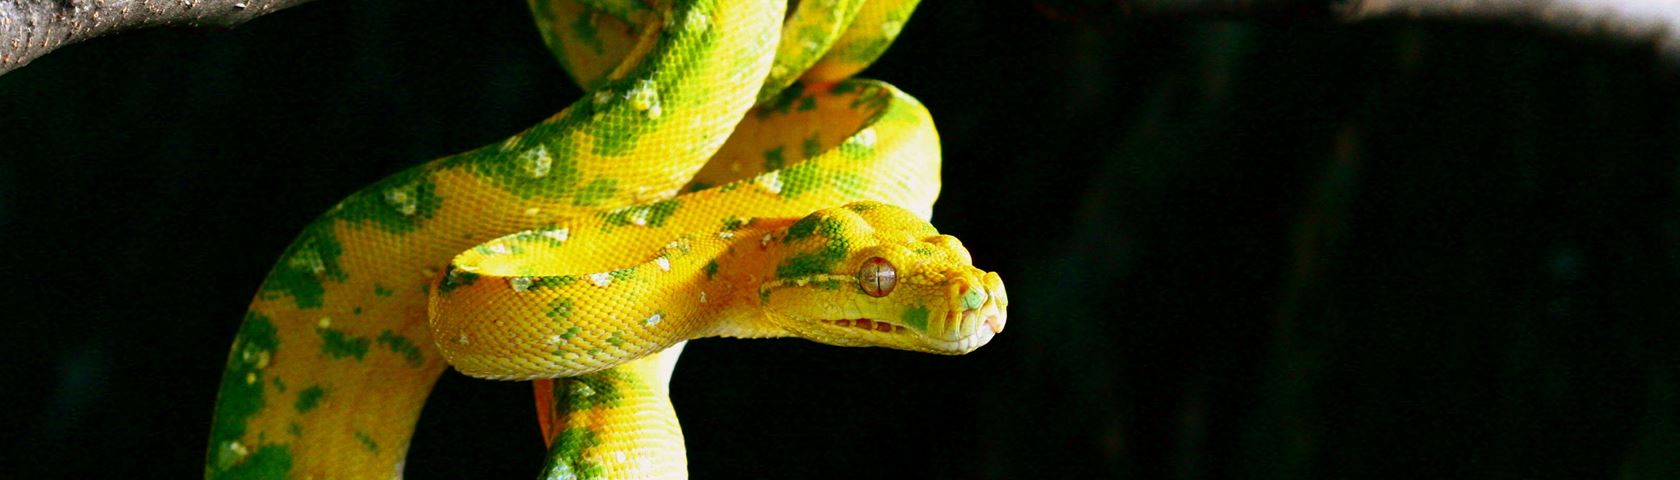 Green Tree Python • Image • WallpaperFusion by Binary Fortress Software